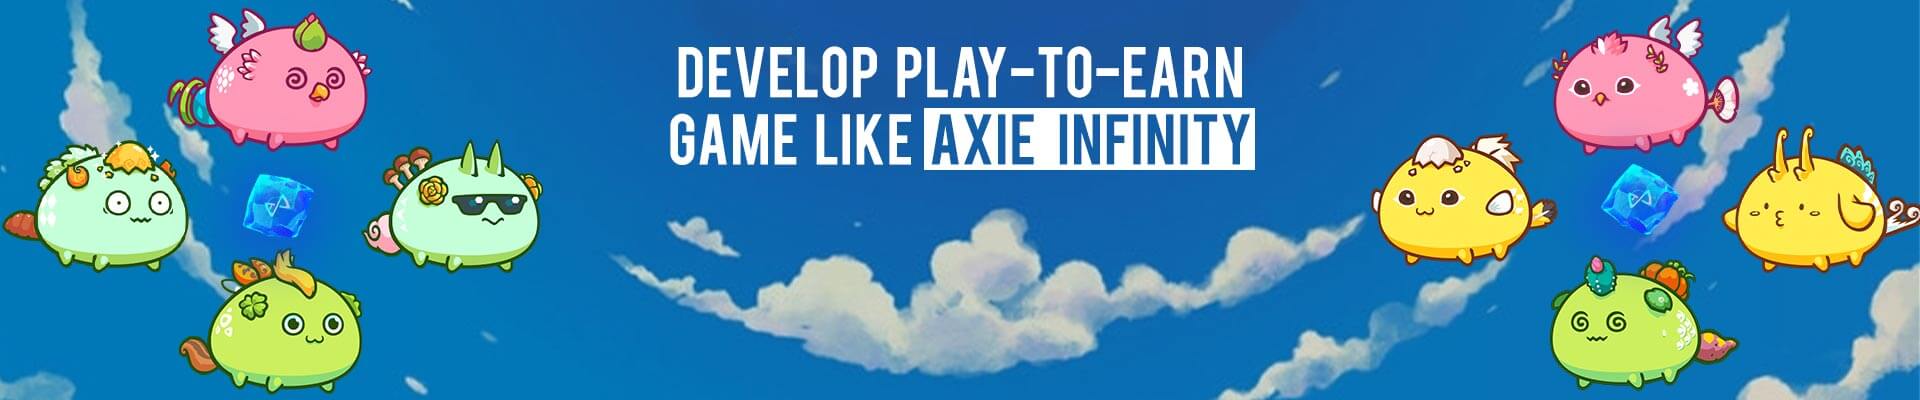 How to Develop Play-to-Earn Game like Axie Infinity? [2022]